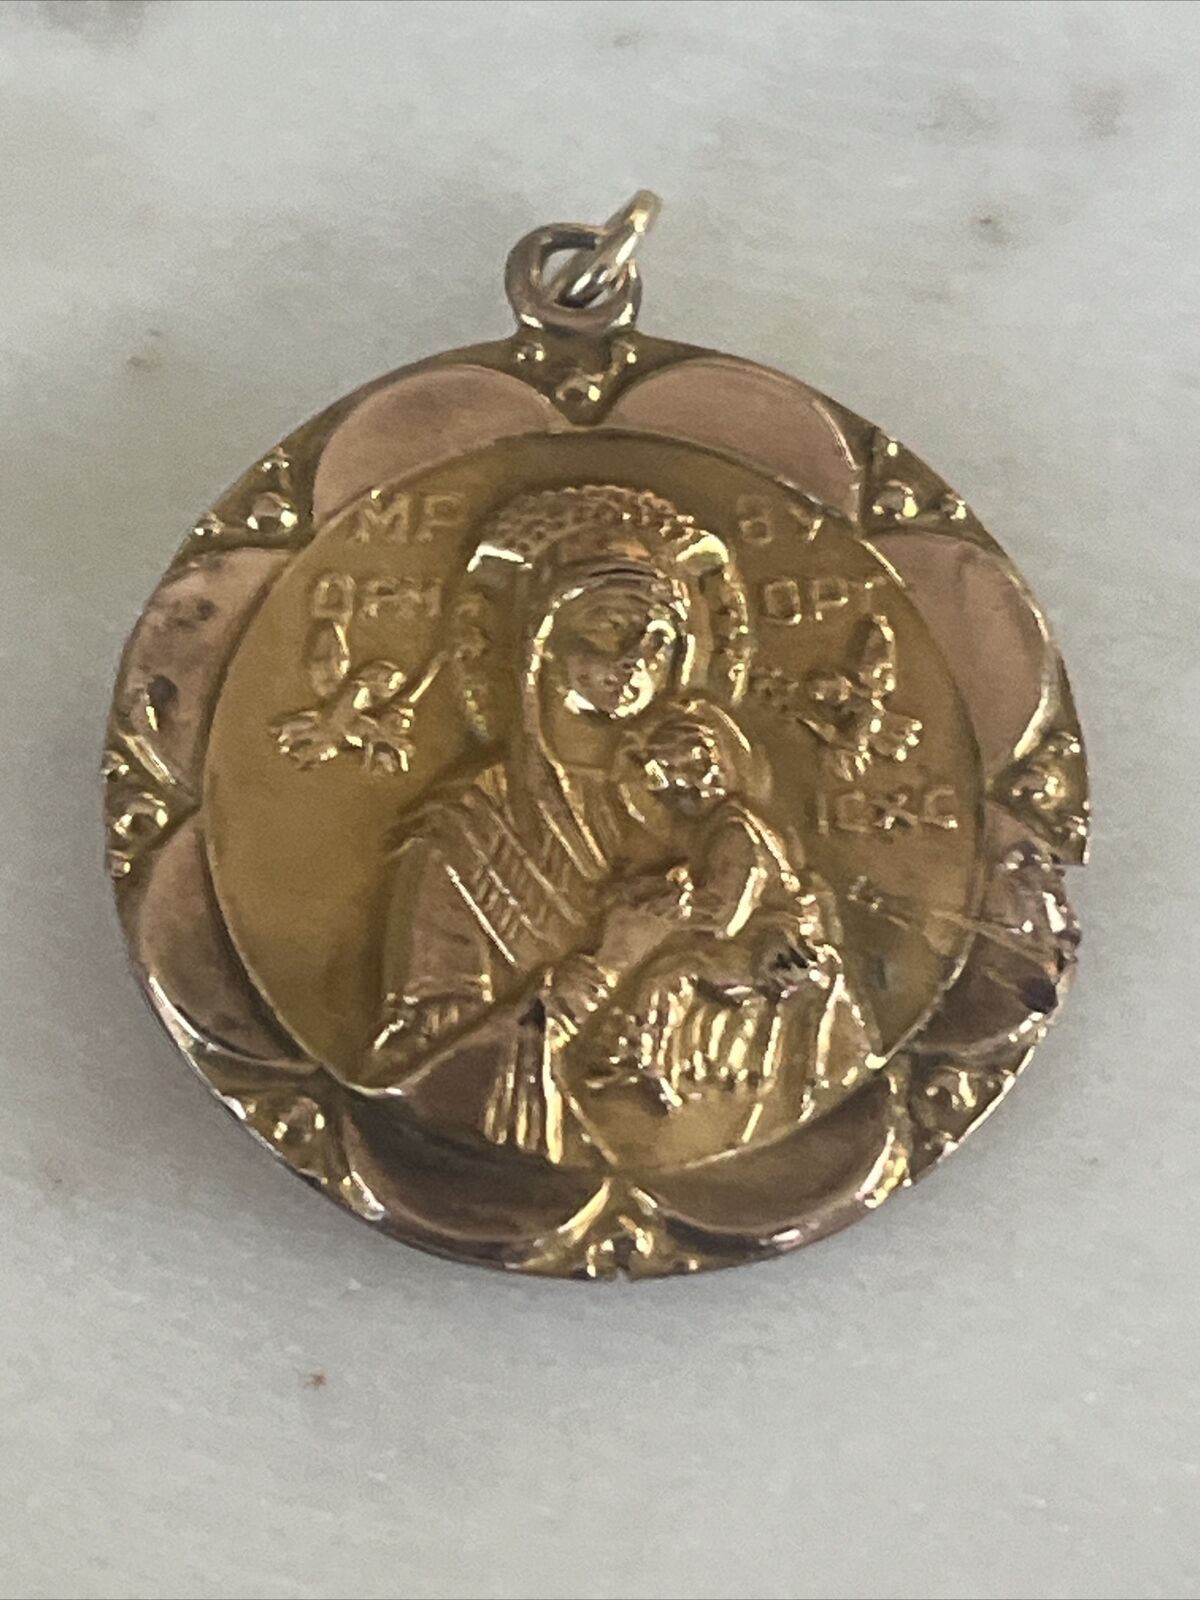 GOLD FILLED JESUS CHRIST MARY RELIGIOUS GF CHARM PENDANT JEWELRY 7.6 GRAMS  ❤️